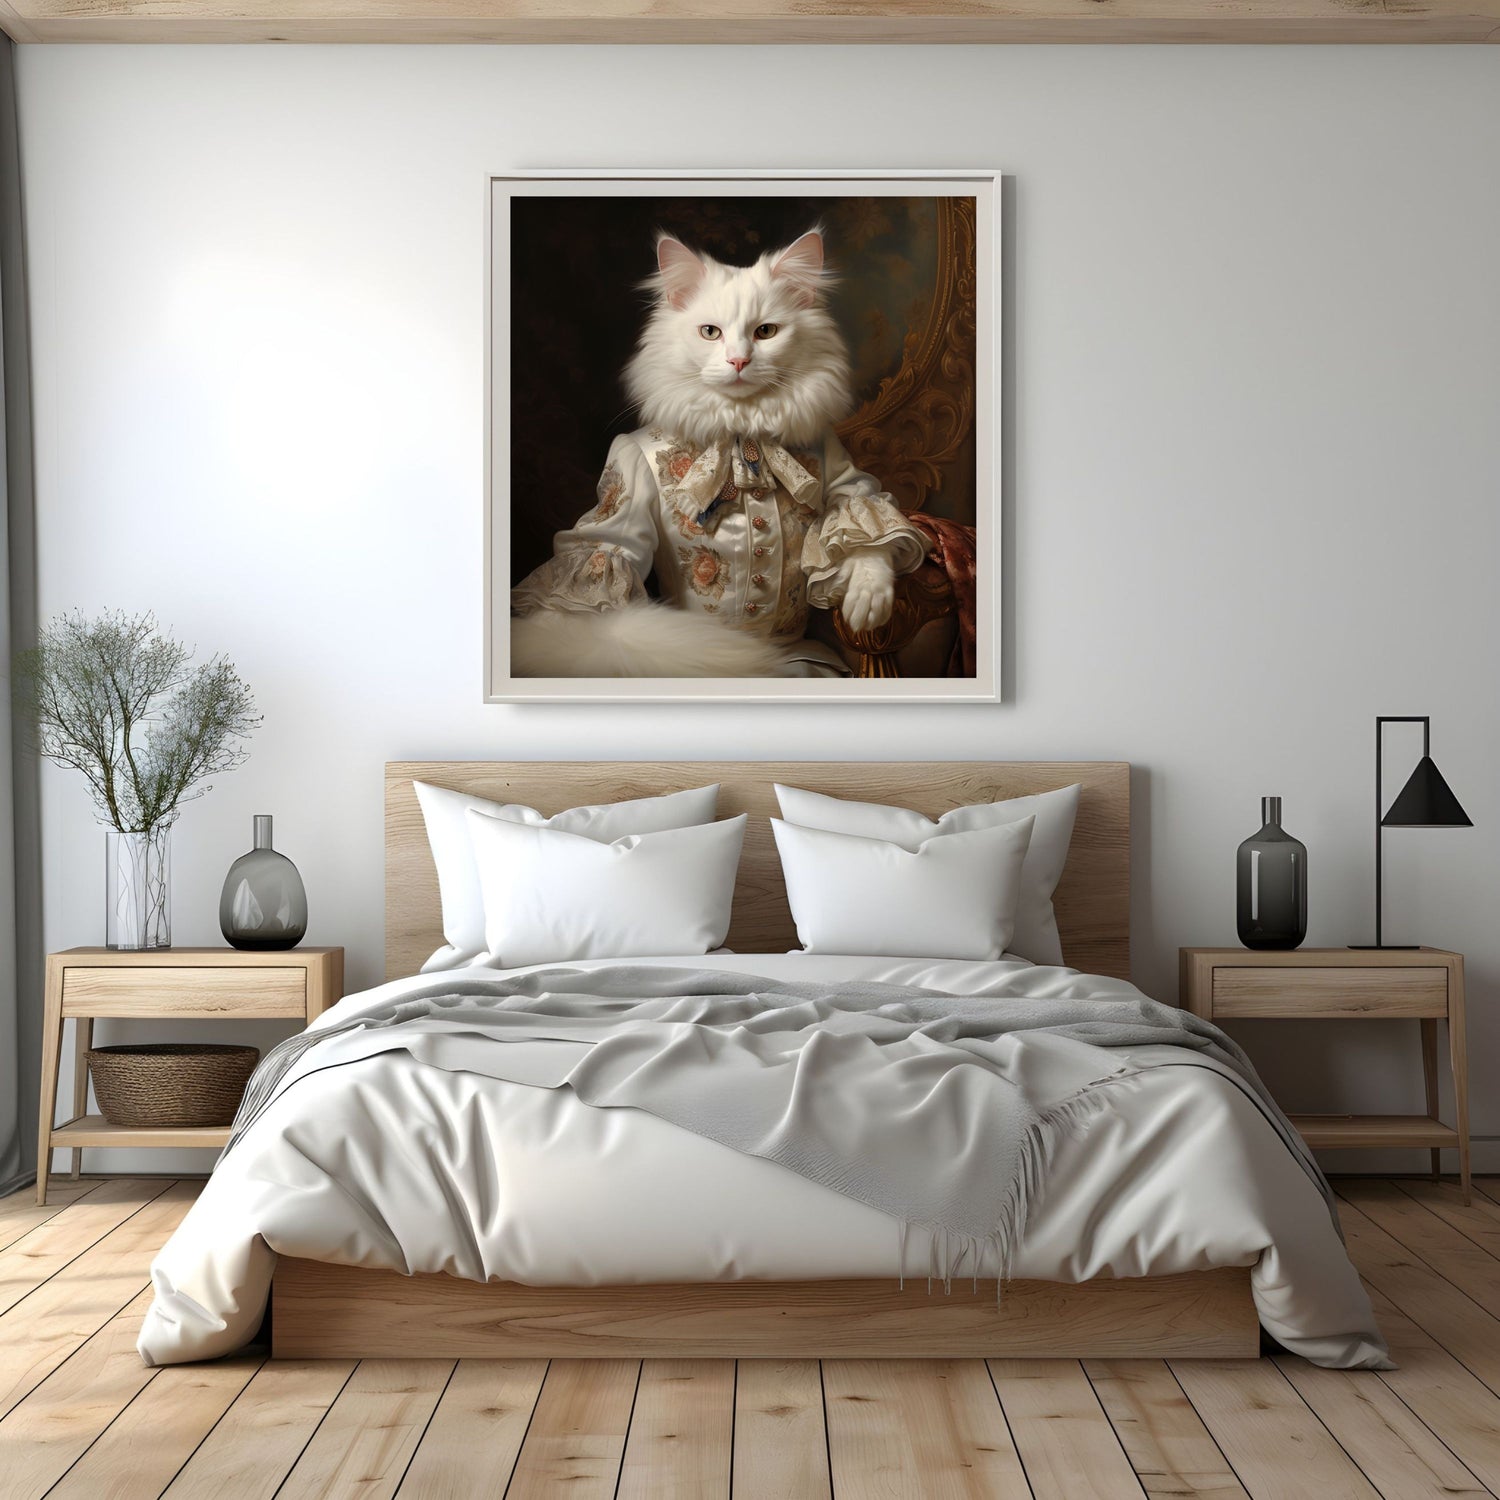 A painting of a cat wearing aristocratic clothing